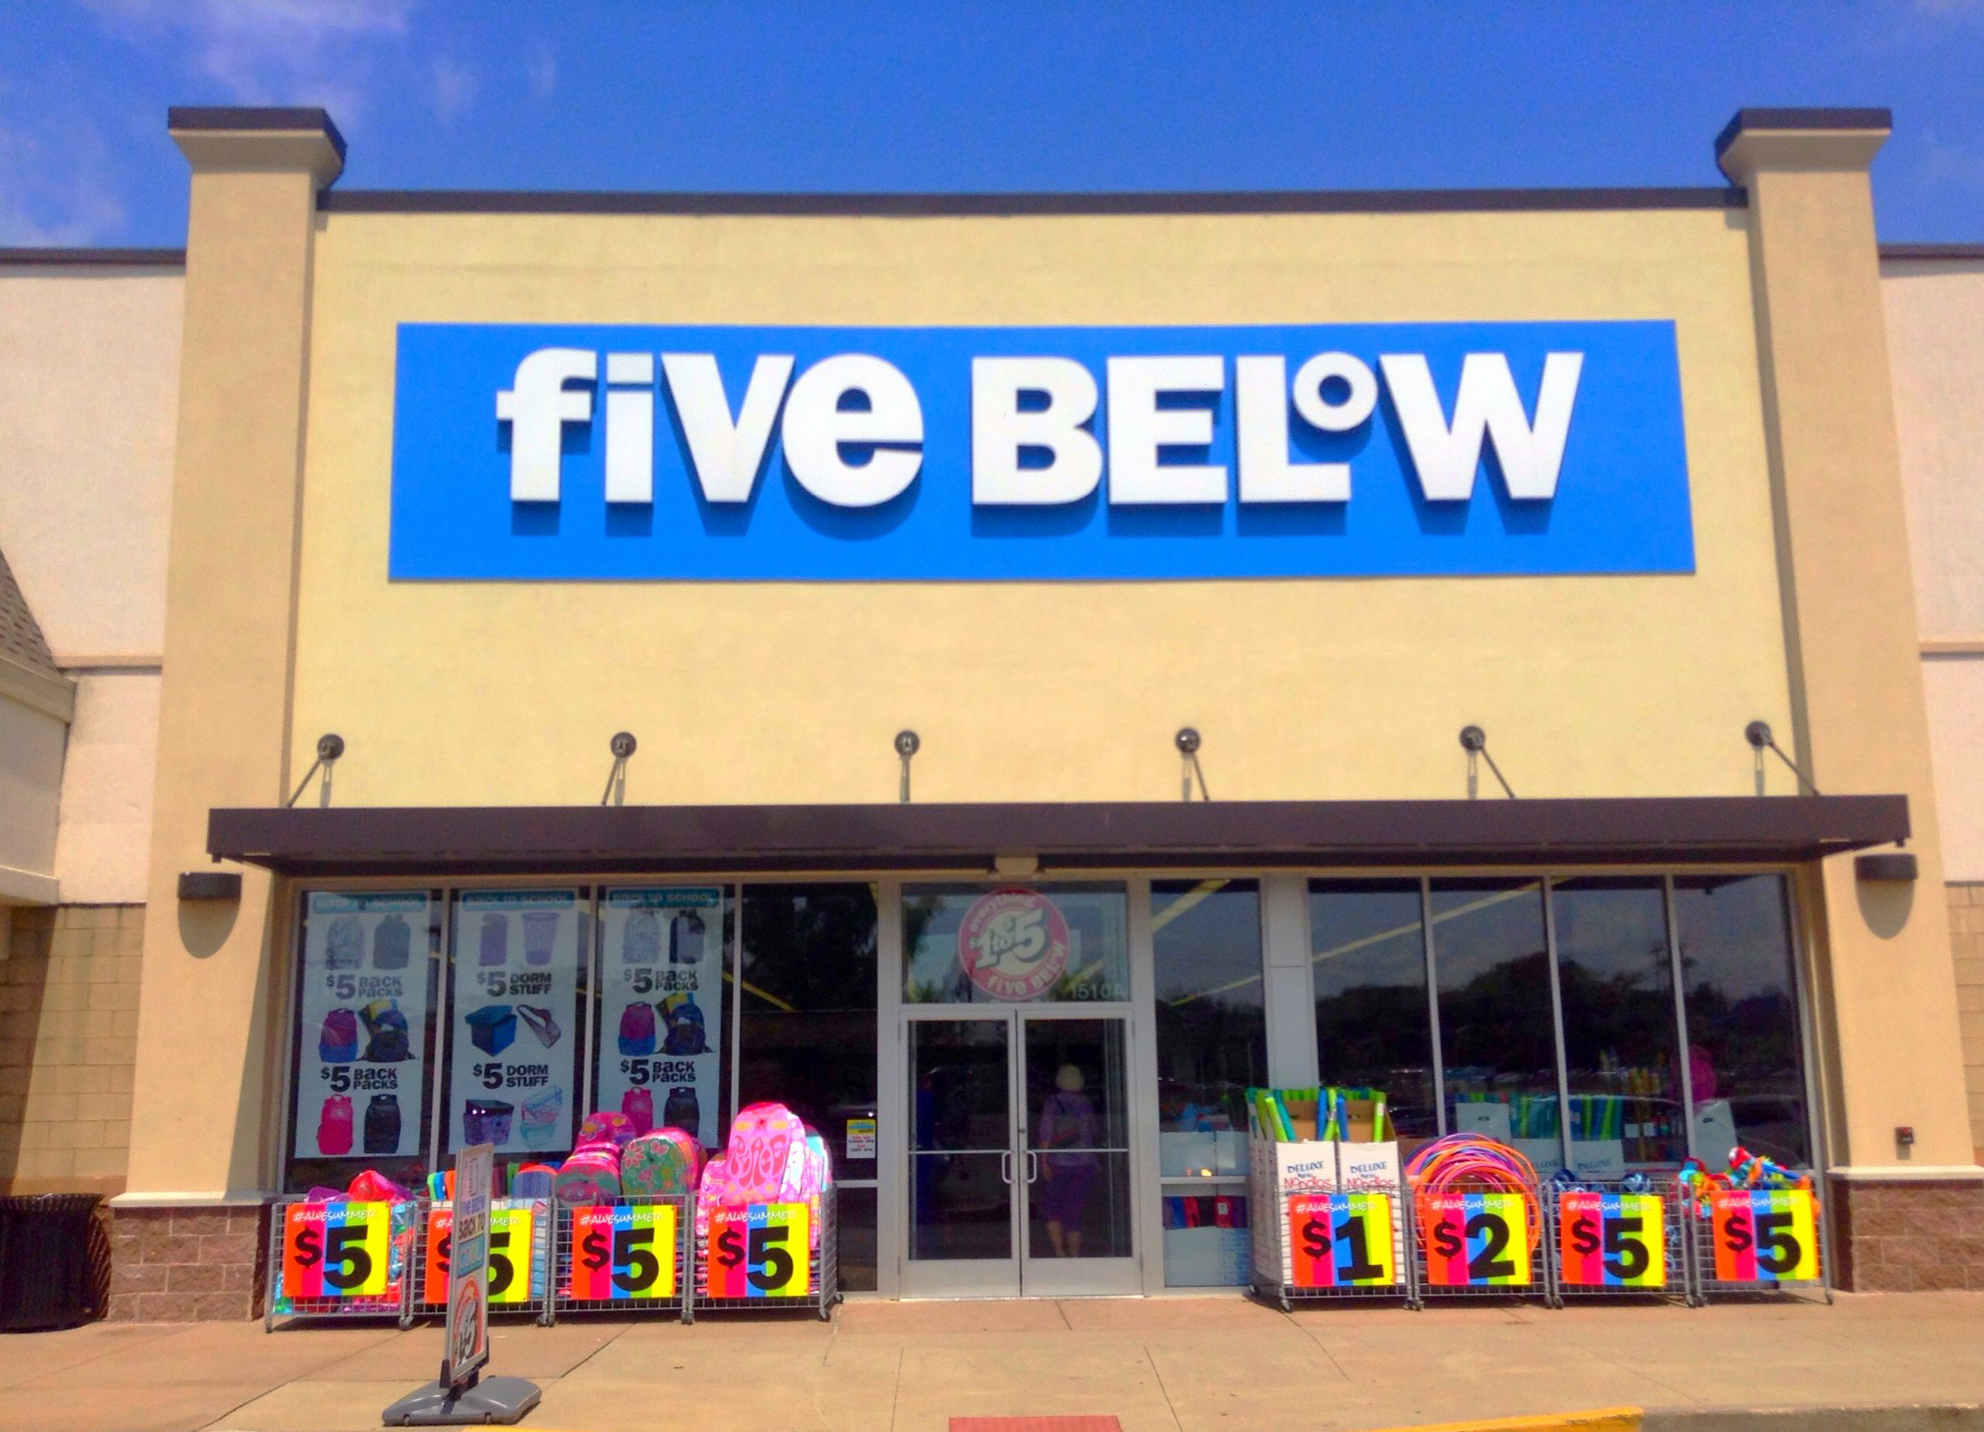 Why Five Below Shares Are Up 5% Today